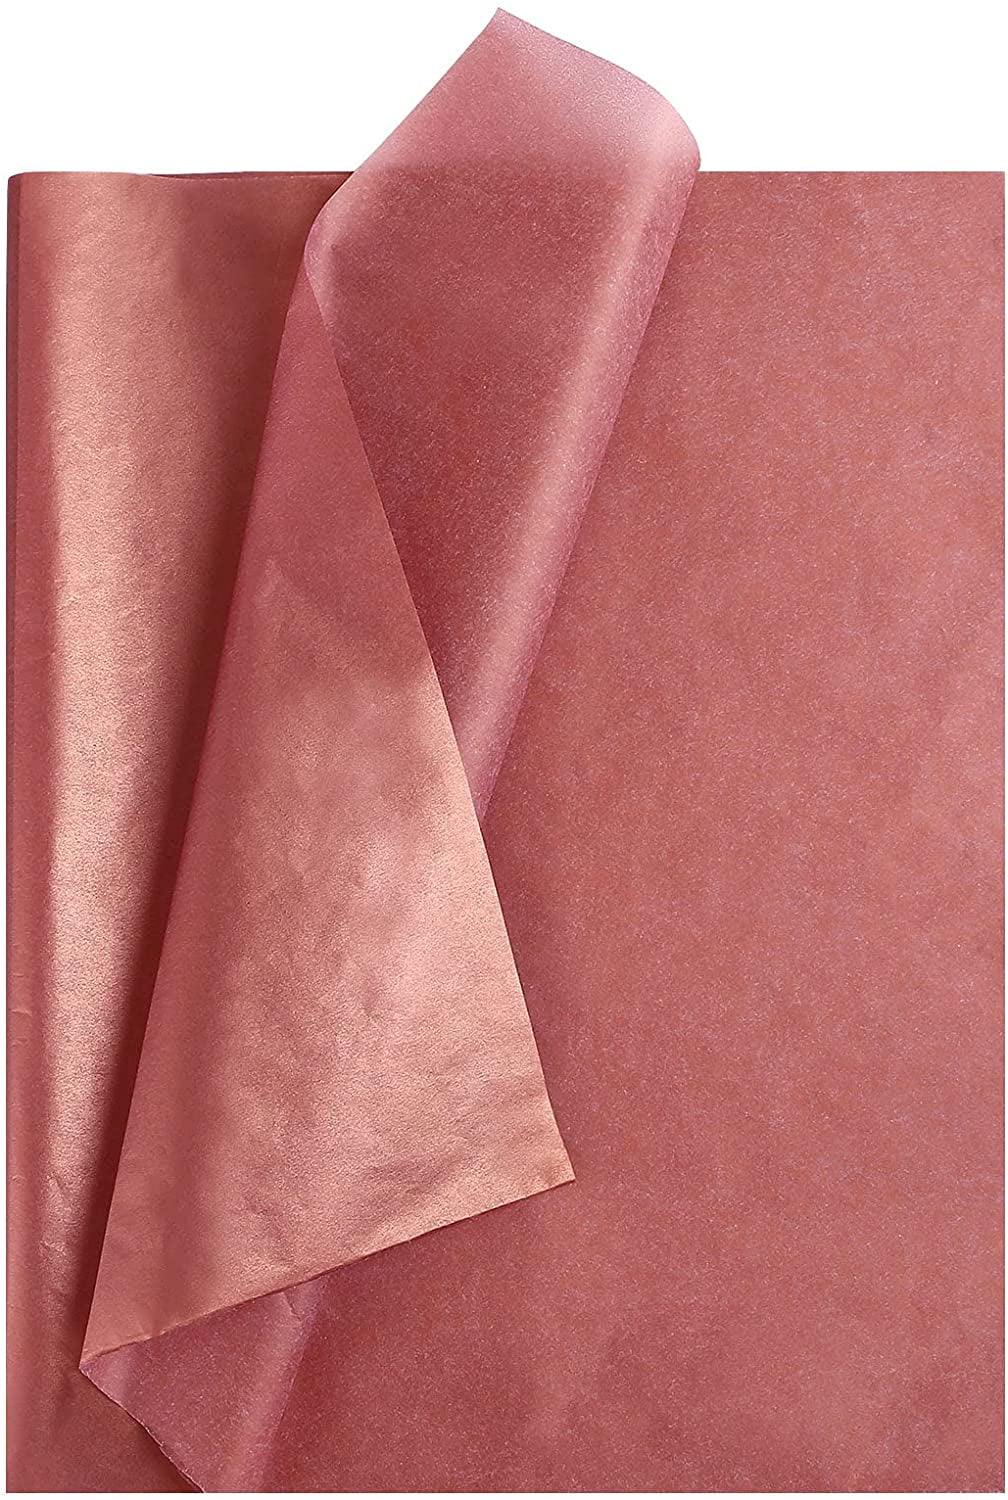 Naler 60 Sheets Rose Gold Tissue Paper Bulk,15x 20 Crafts Wrapping Tissue  for Gift Bags DIY Party